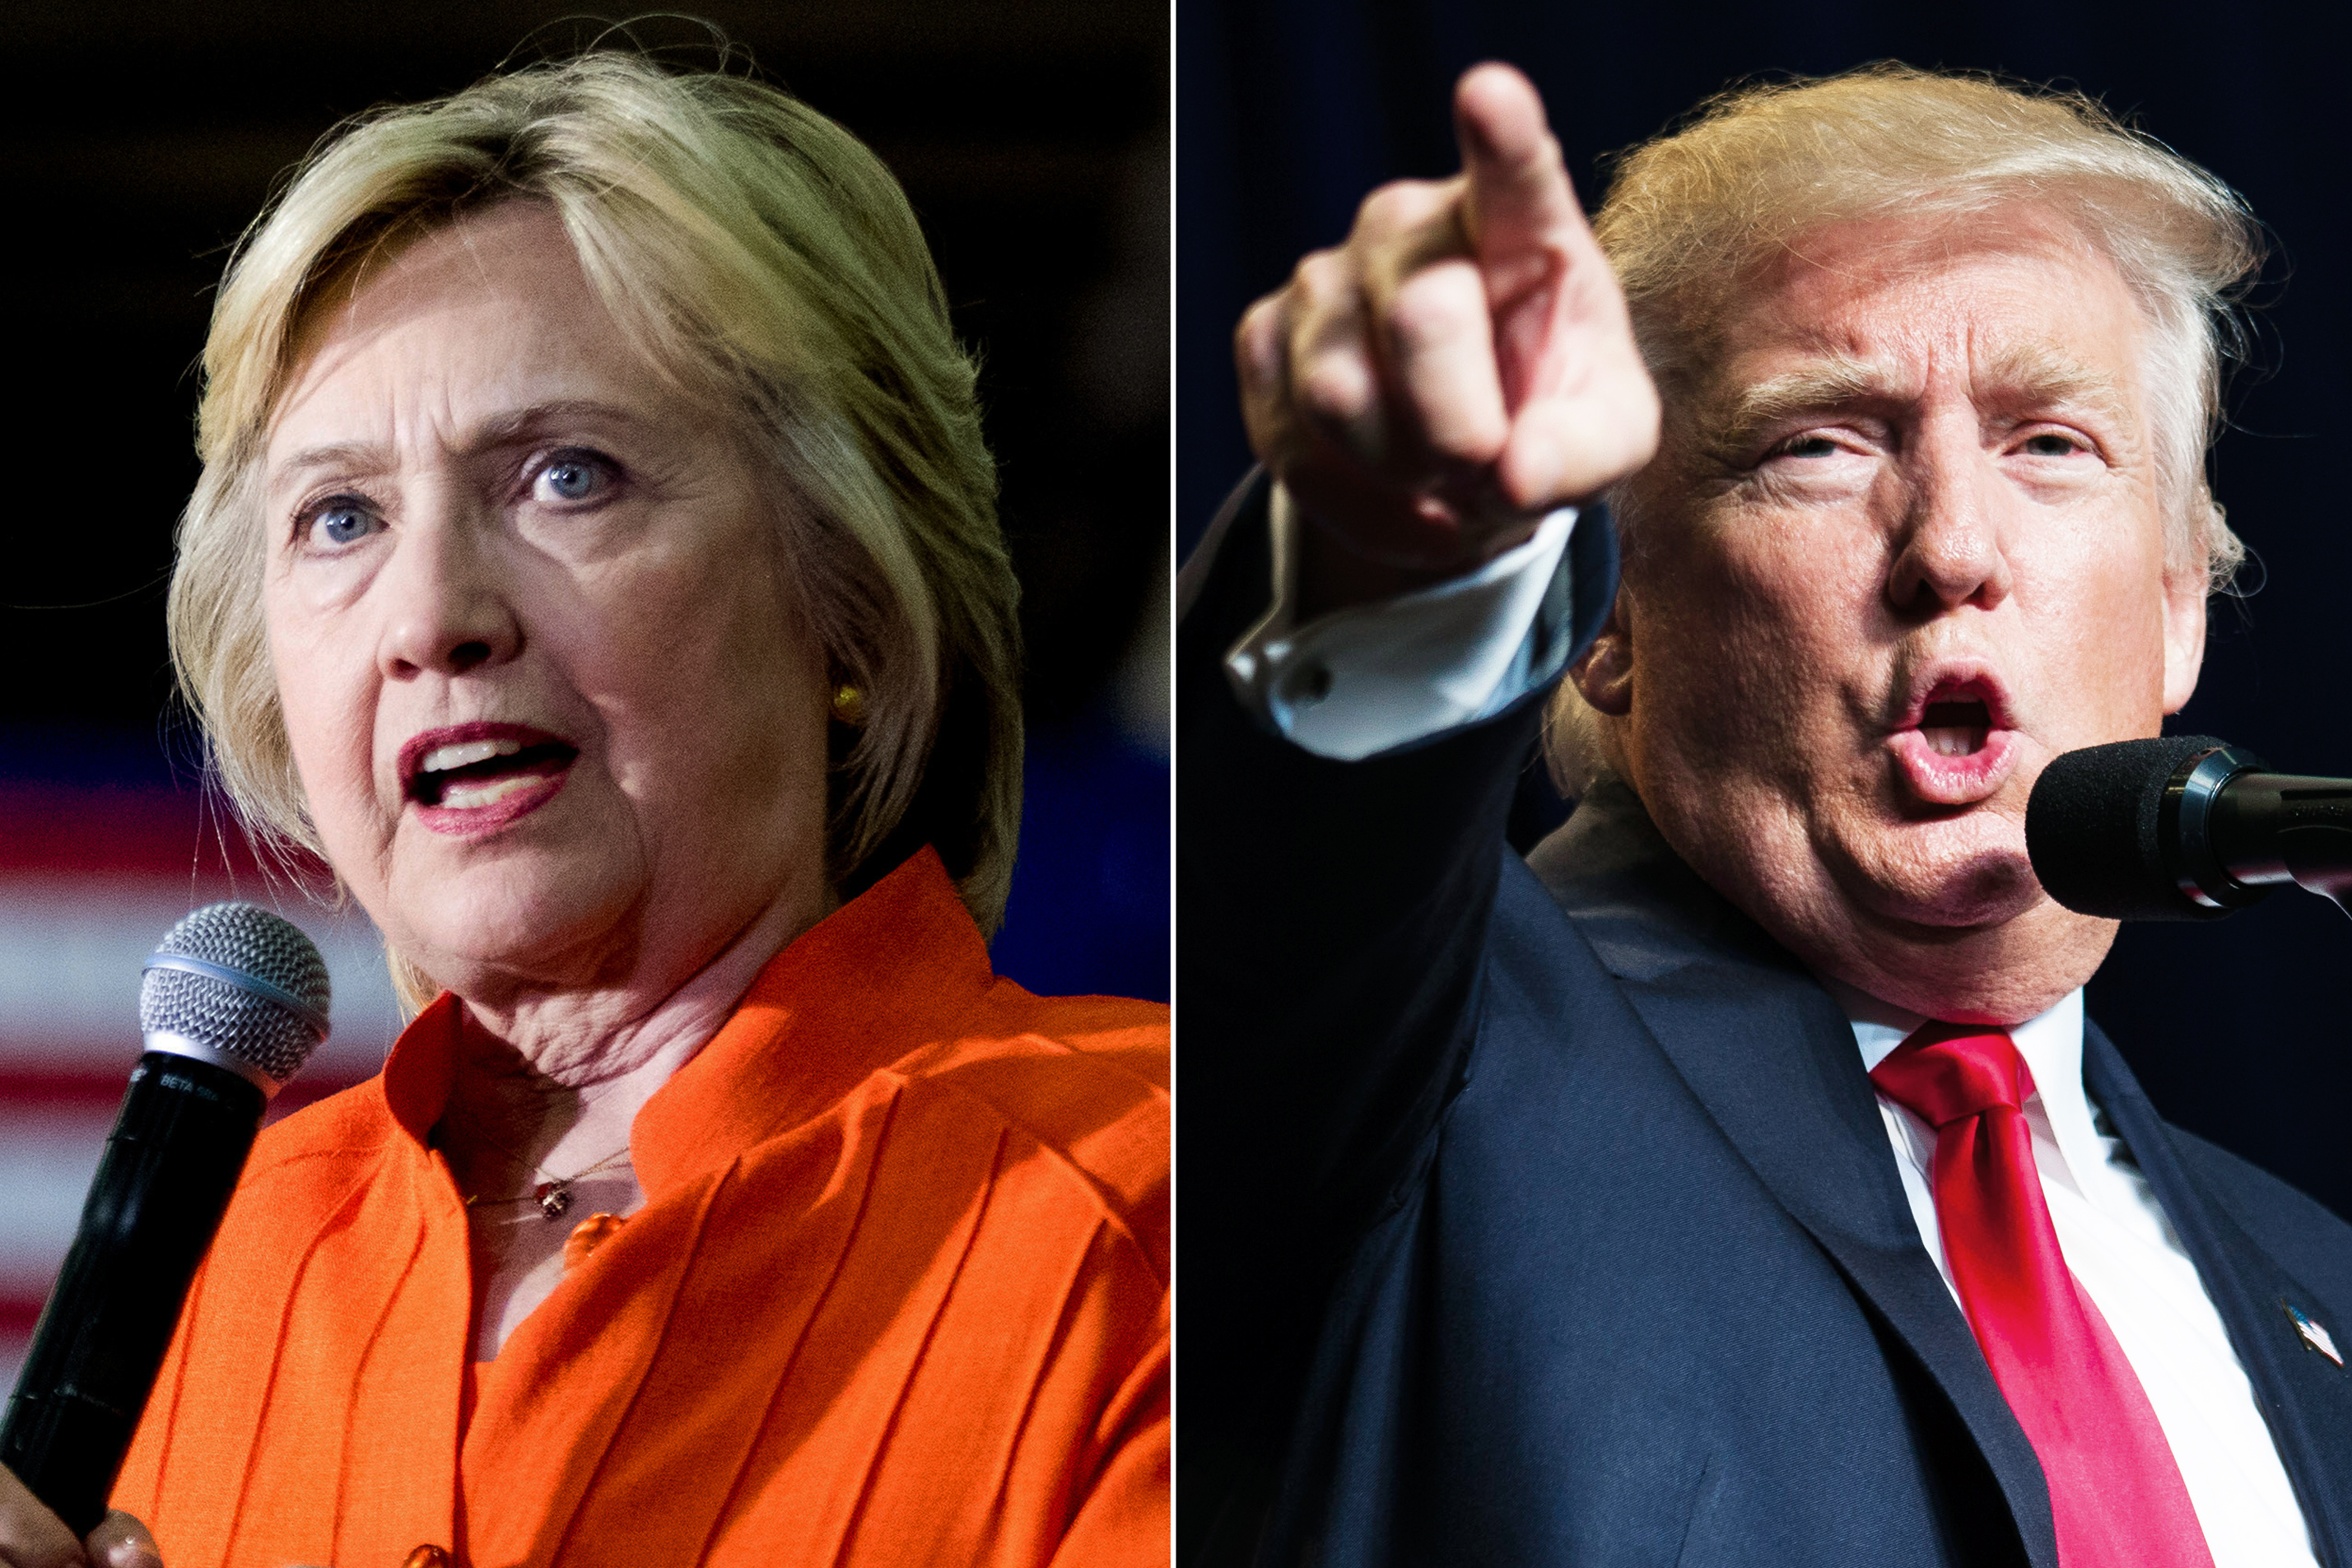 Hillary Clinton in St. Petersburg, FL, on Aug. 8, 2016 (L); Donald Trump in Green Bay, WI, on Aug. 5, 2016. (Andrew Harnik—AP (L); Darren Hauck—Getty Images)